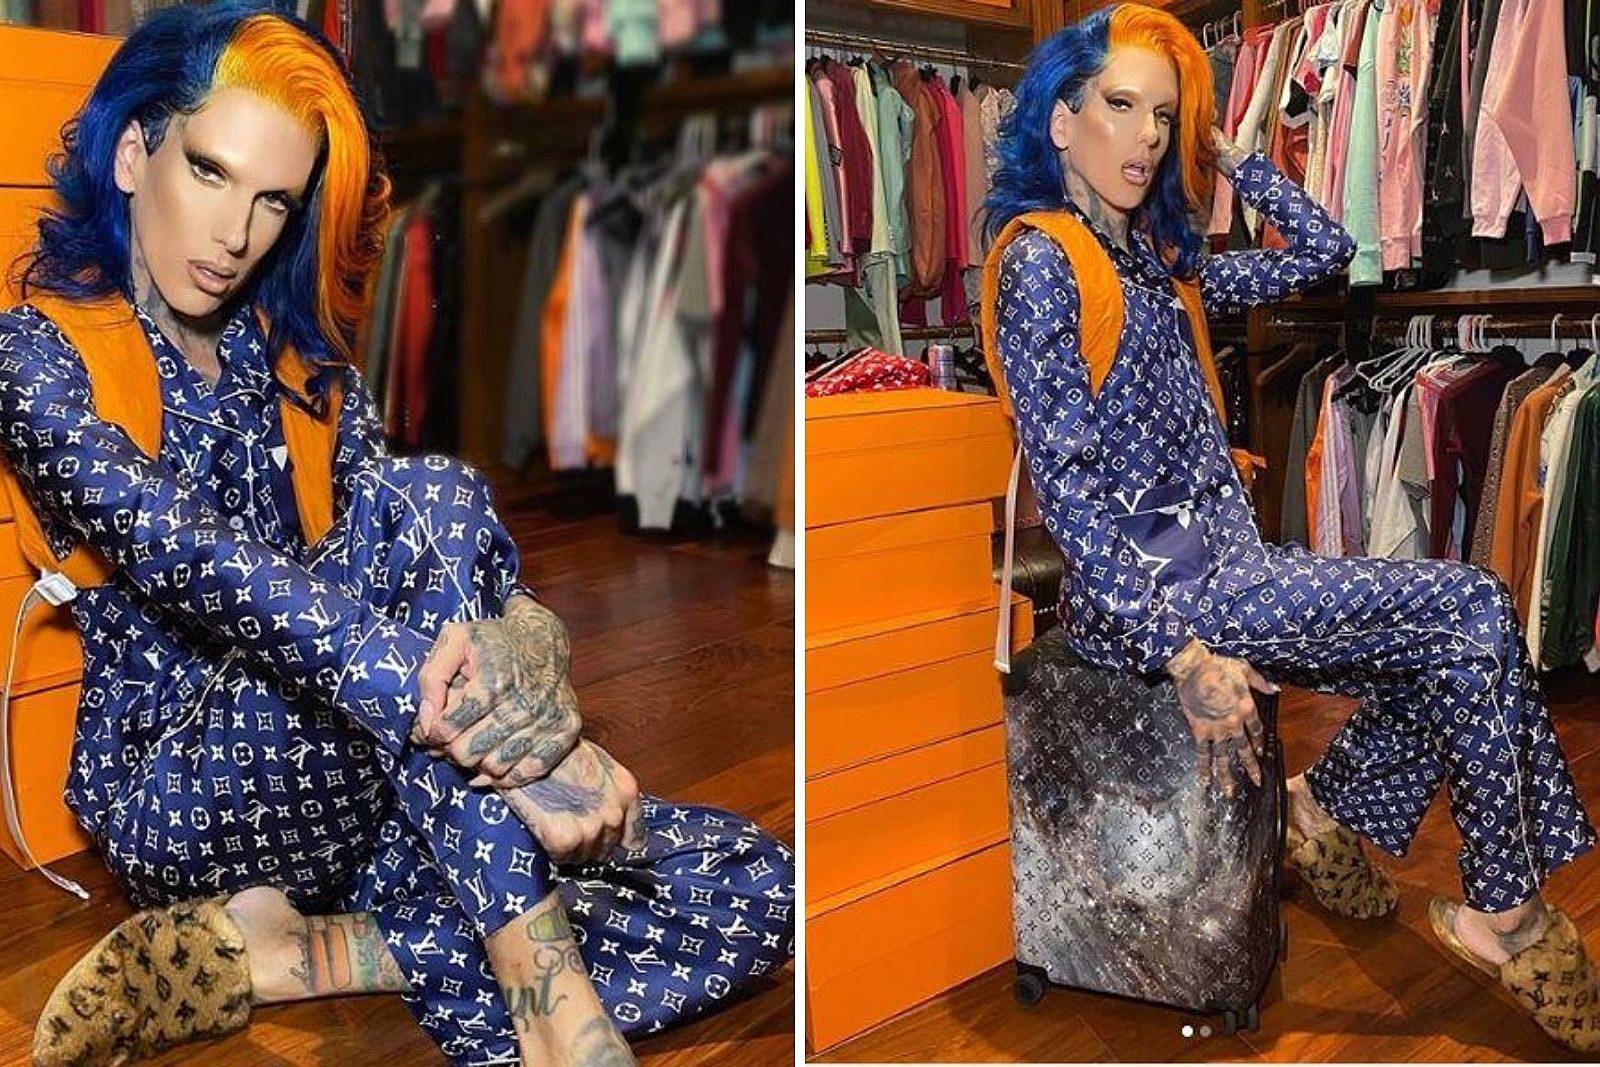 Inside Jeffree Star's ranch lifestyle and glamorous physical transformation